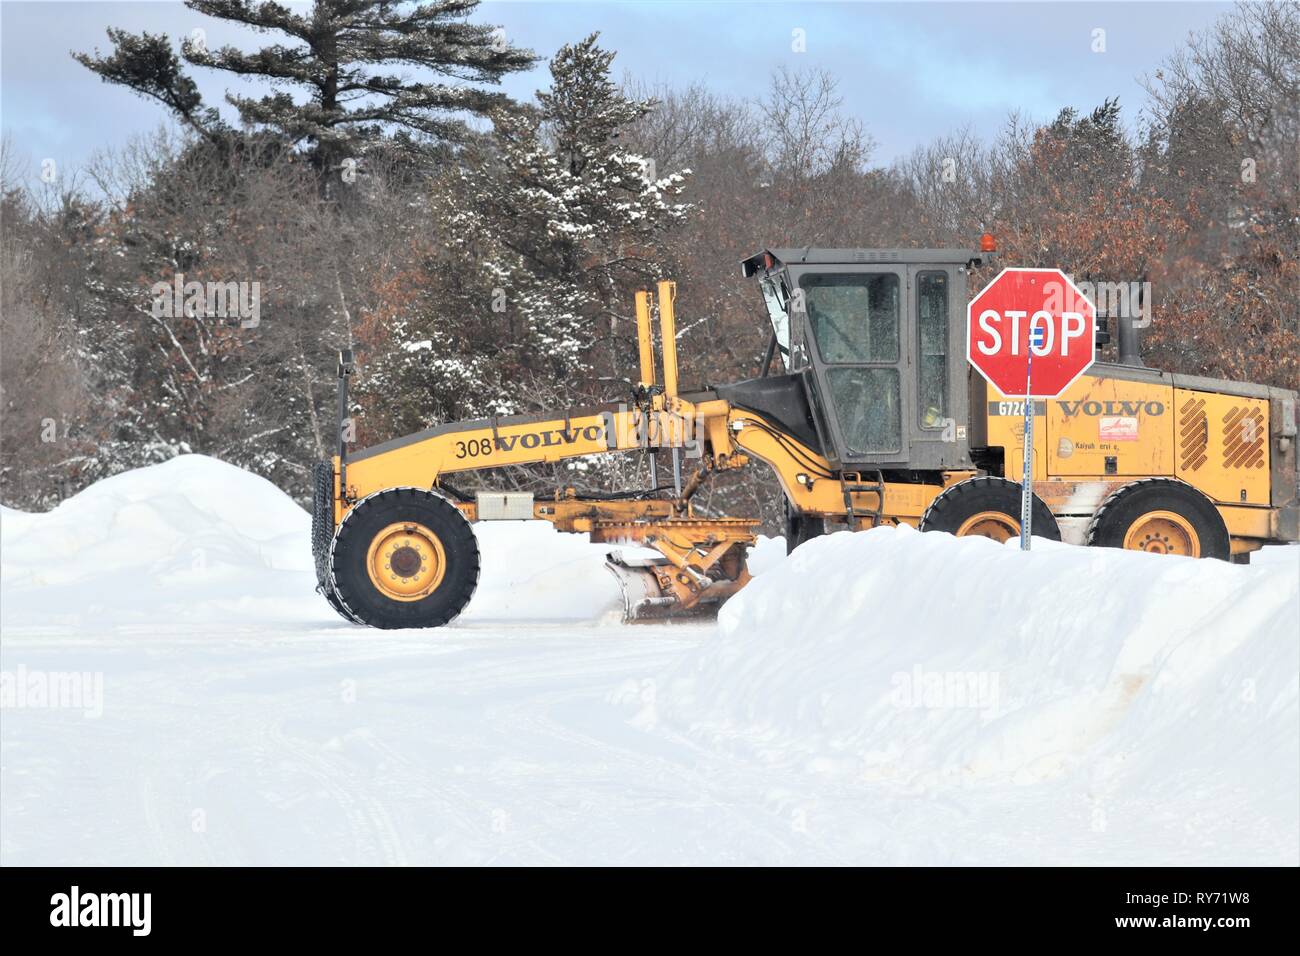 An equipment operator with the Fort McCoy snow removal contractor, Kaiyuh Services LLC of Anchorage, Alaska, clears snow Feb. 27, 2019, at Fort McCoy, Wis. Winter in Wisconsin can provide all kinds of bad weather, including freezing rain, snow, or sleet at any time or even all in one day. When that happens, the Fort McCoy snow-removal team plows through whatever Mother Nature dishes out. The team includes as well as Directorate of Public Works personnel. The team helps keep more than 400 miles of roads, sidewalks, and parking areas clear so the Fort McCoy workforce can operate safely. (U.S. Ar Stock Photo